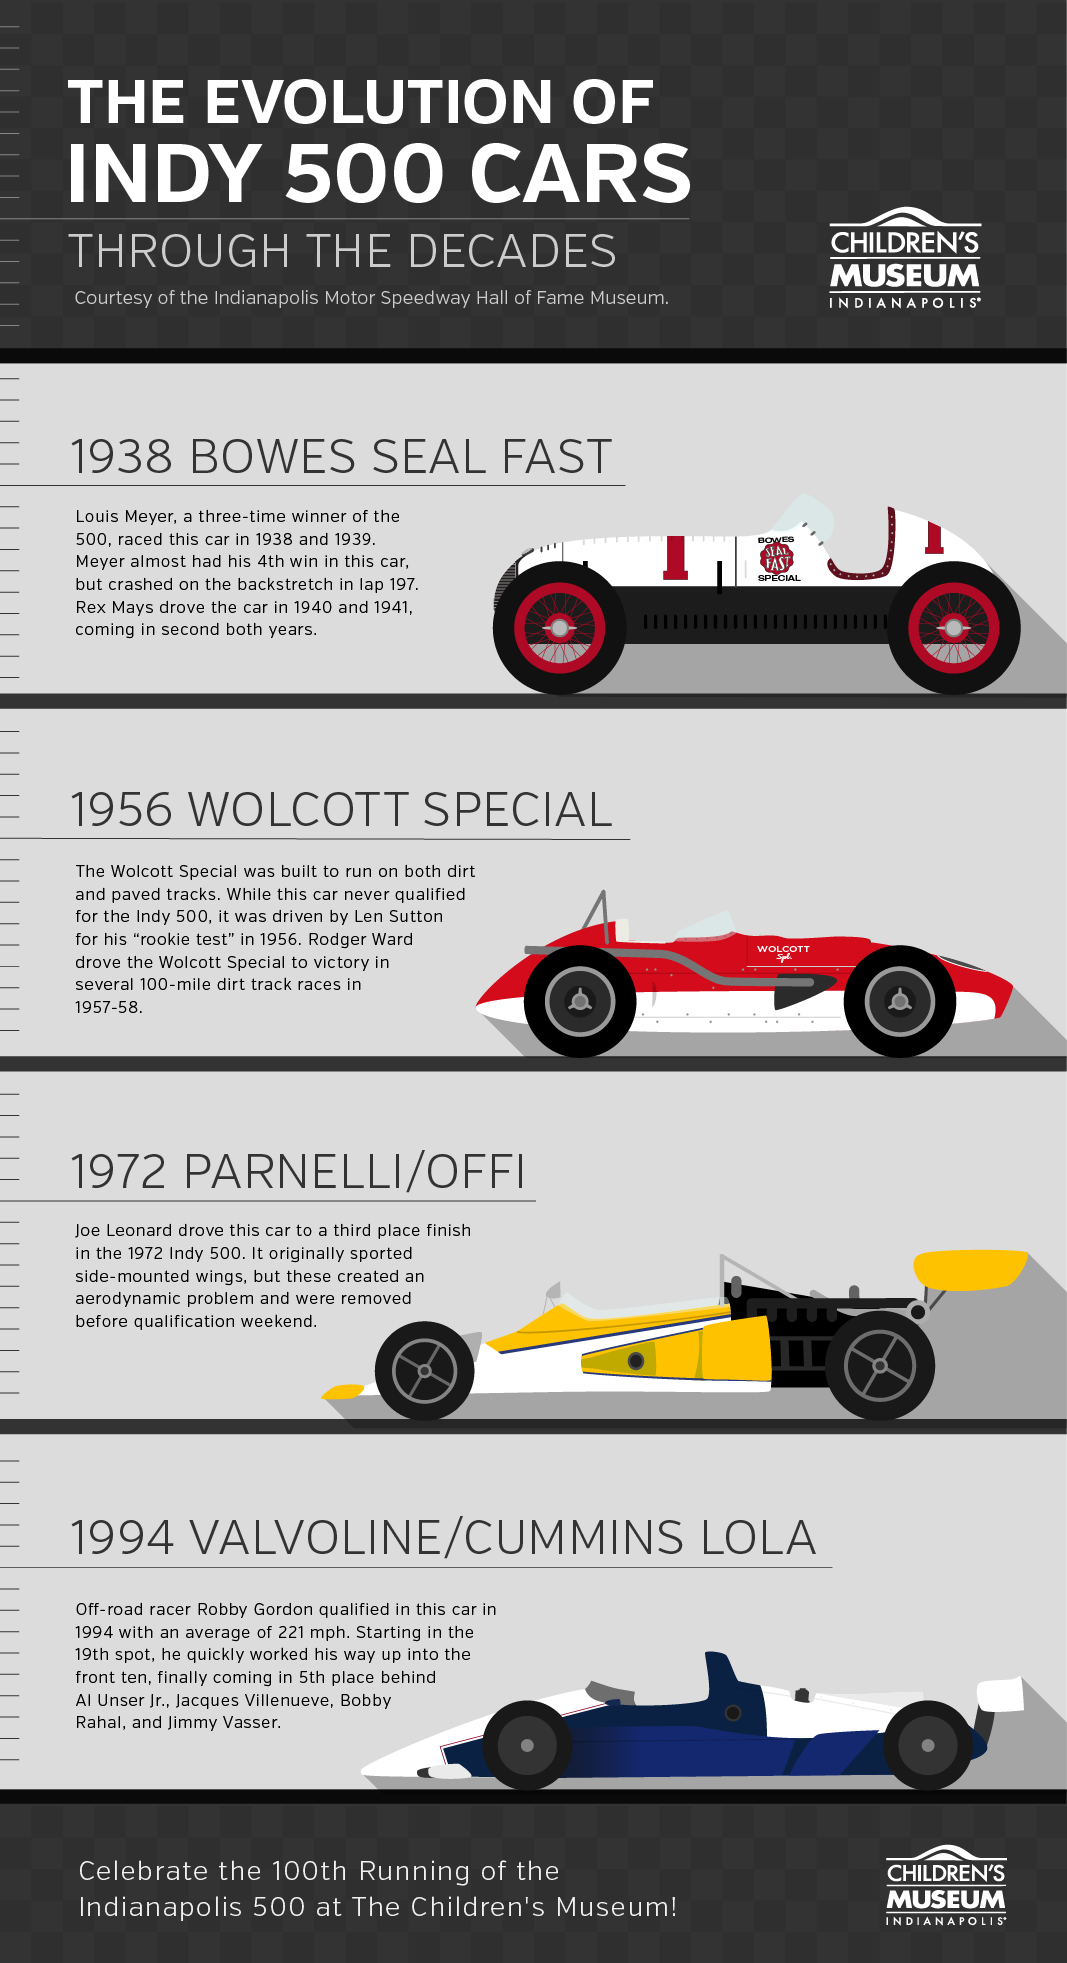 The Evolution of Indy 500 Cars 